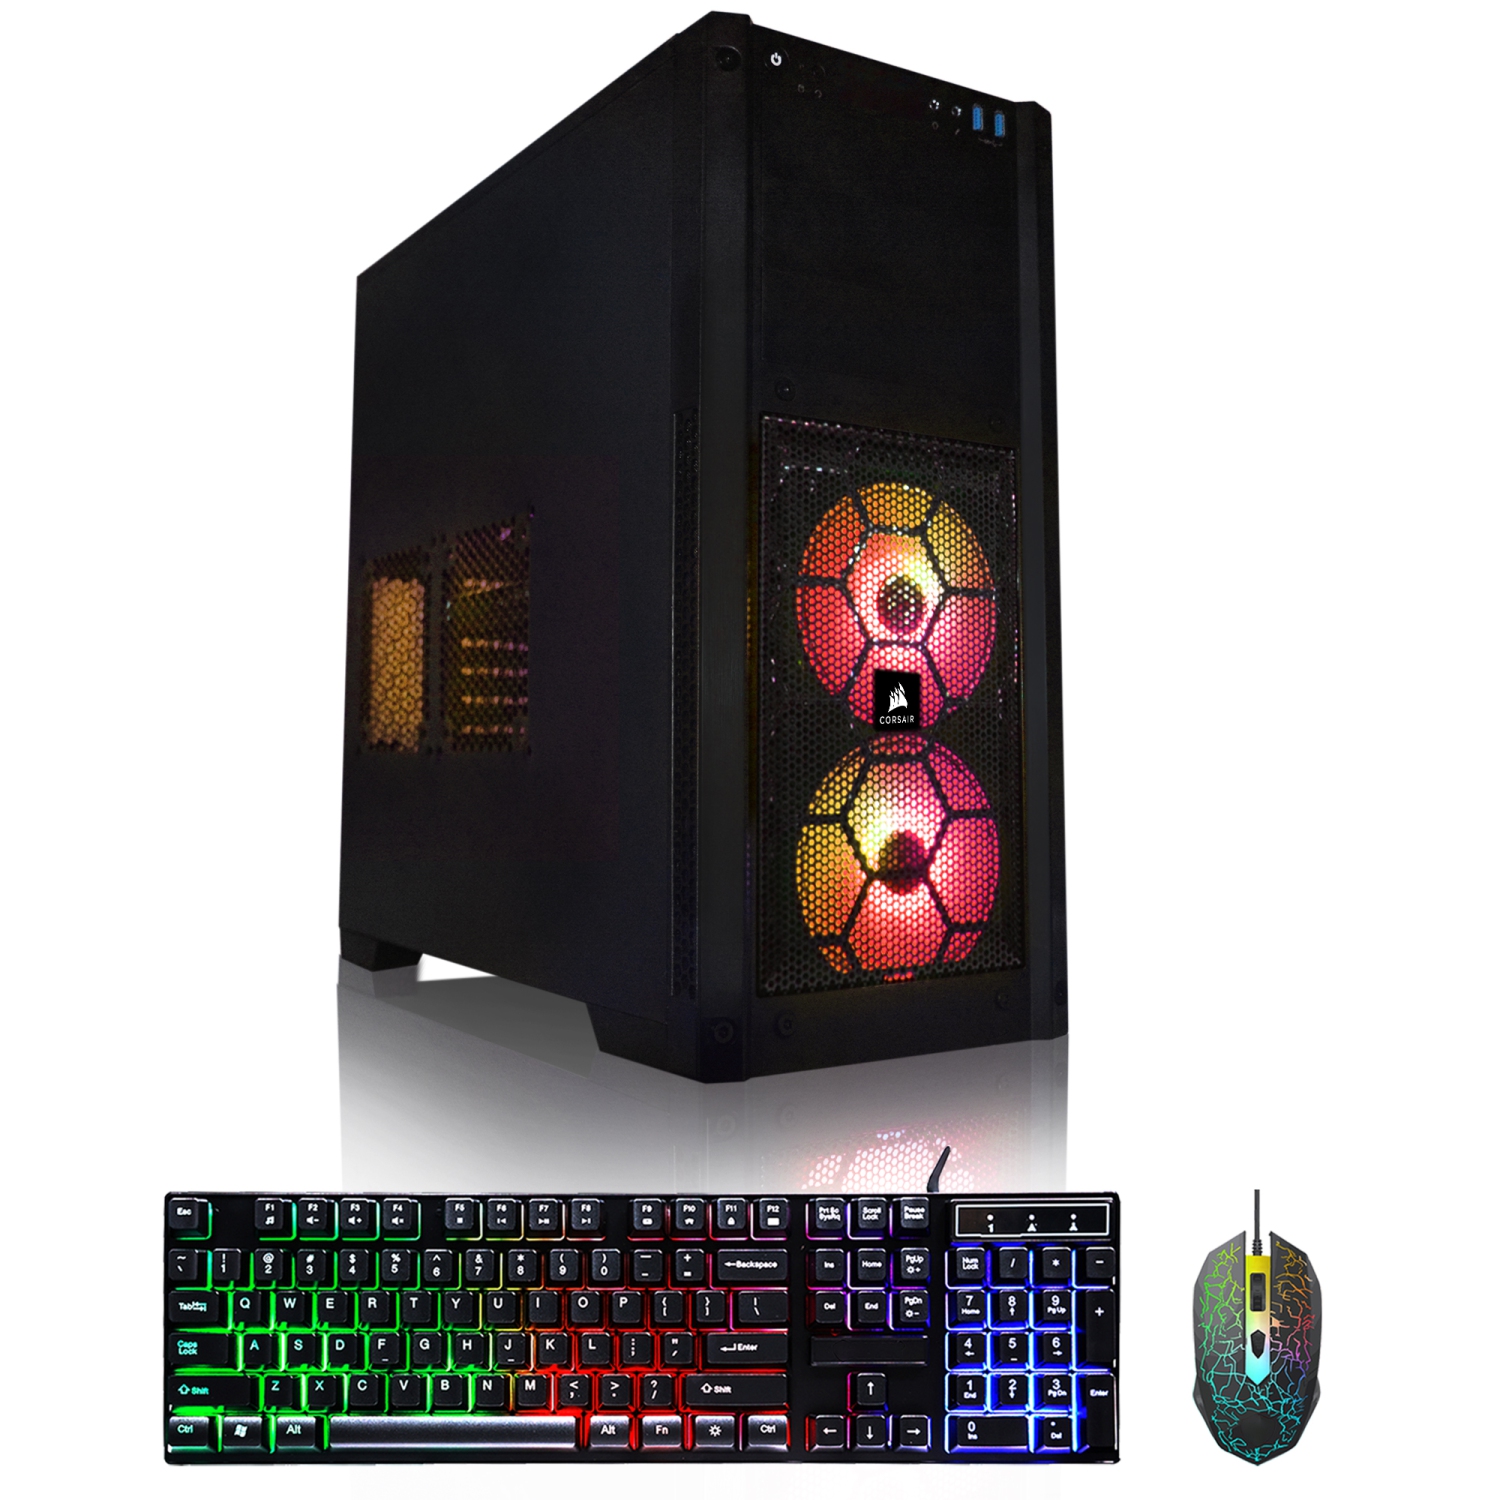 Refurbished (Good) - Gaming PC AMD 8-Core FX upto 4.2GHz Processor 16GB RAM 512GB SSD Nvidia GeForce GT1030 DDR5 Graphics ASUS Motherboard Corsair Chassis RGB KB/Mouse Windows 10